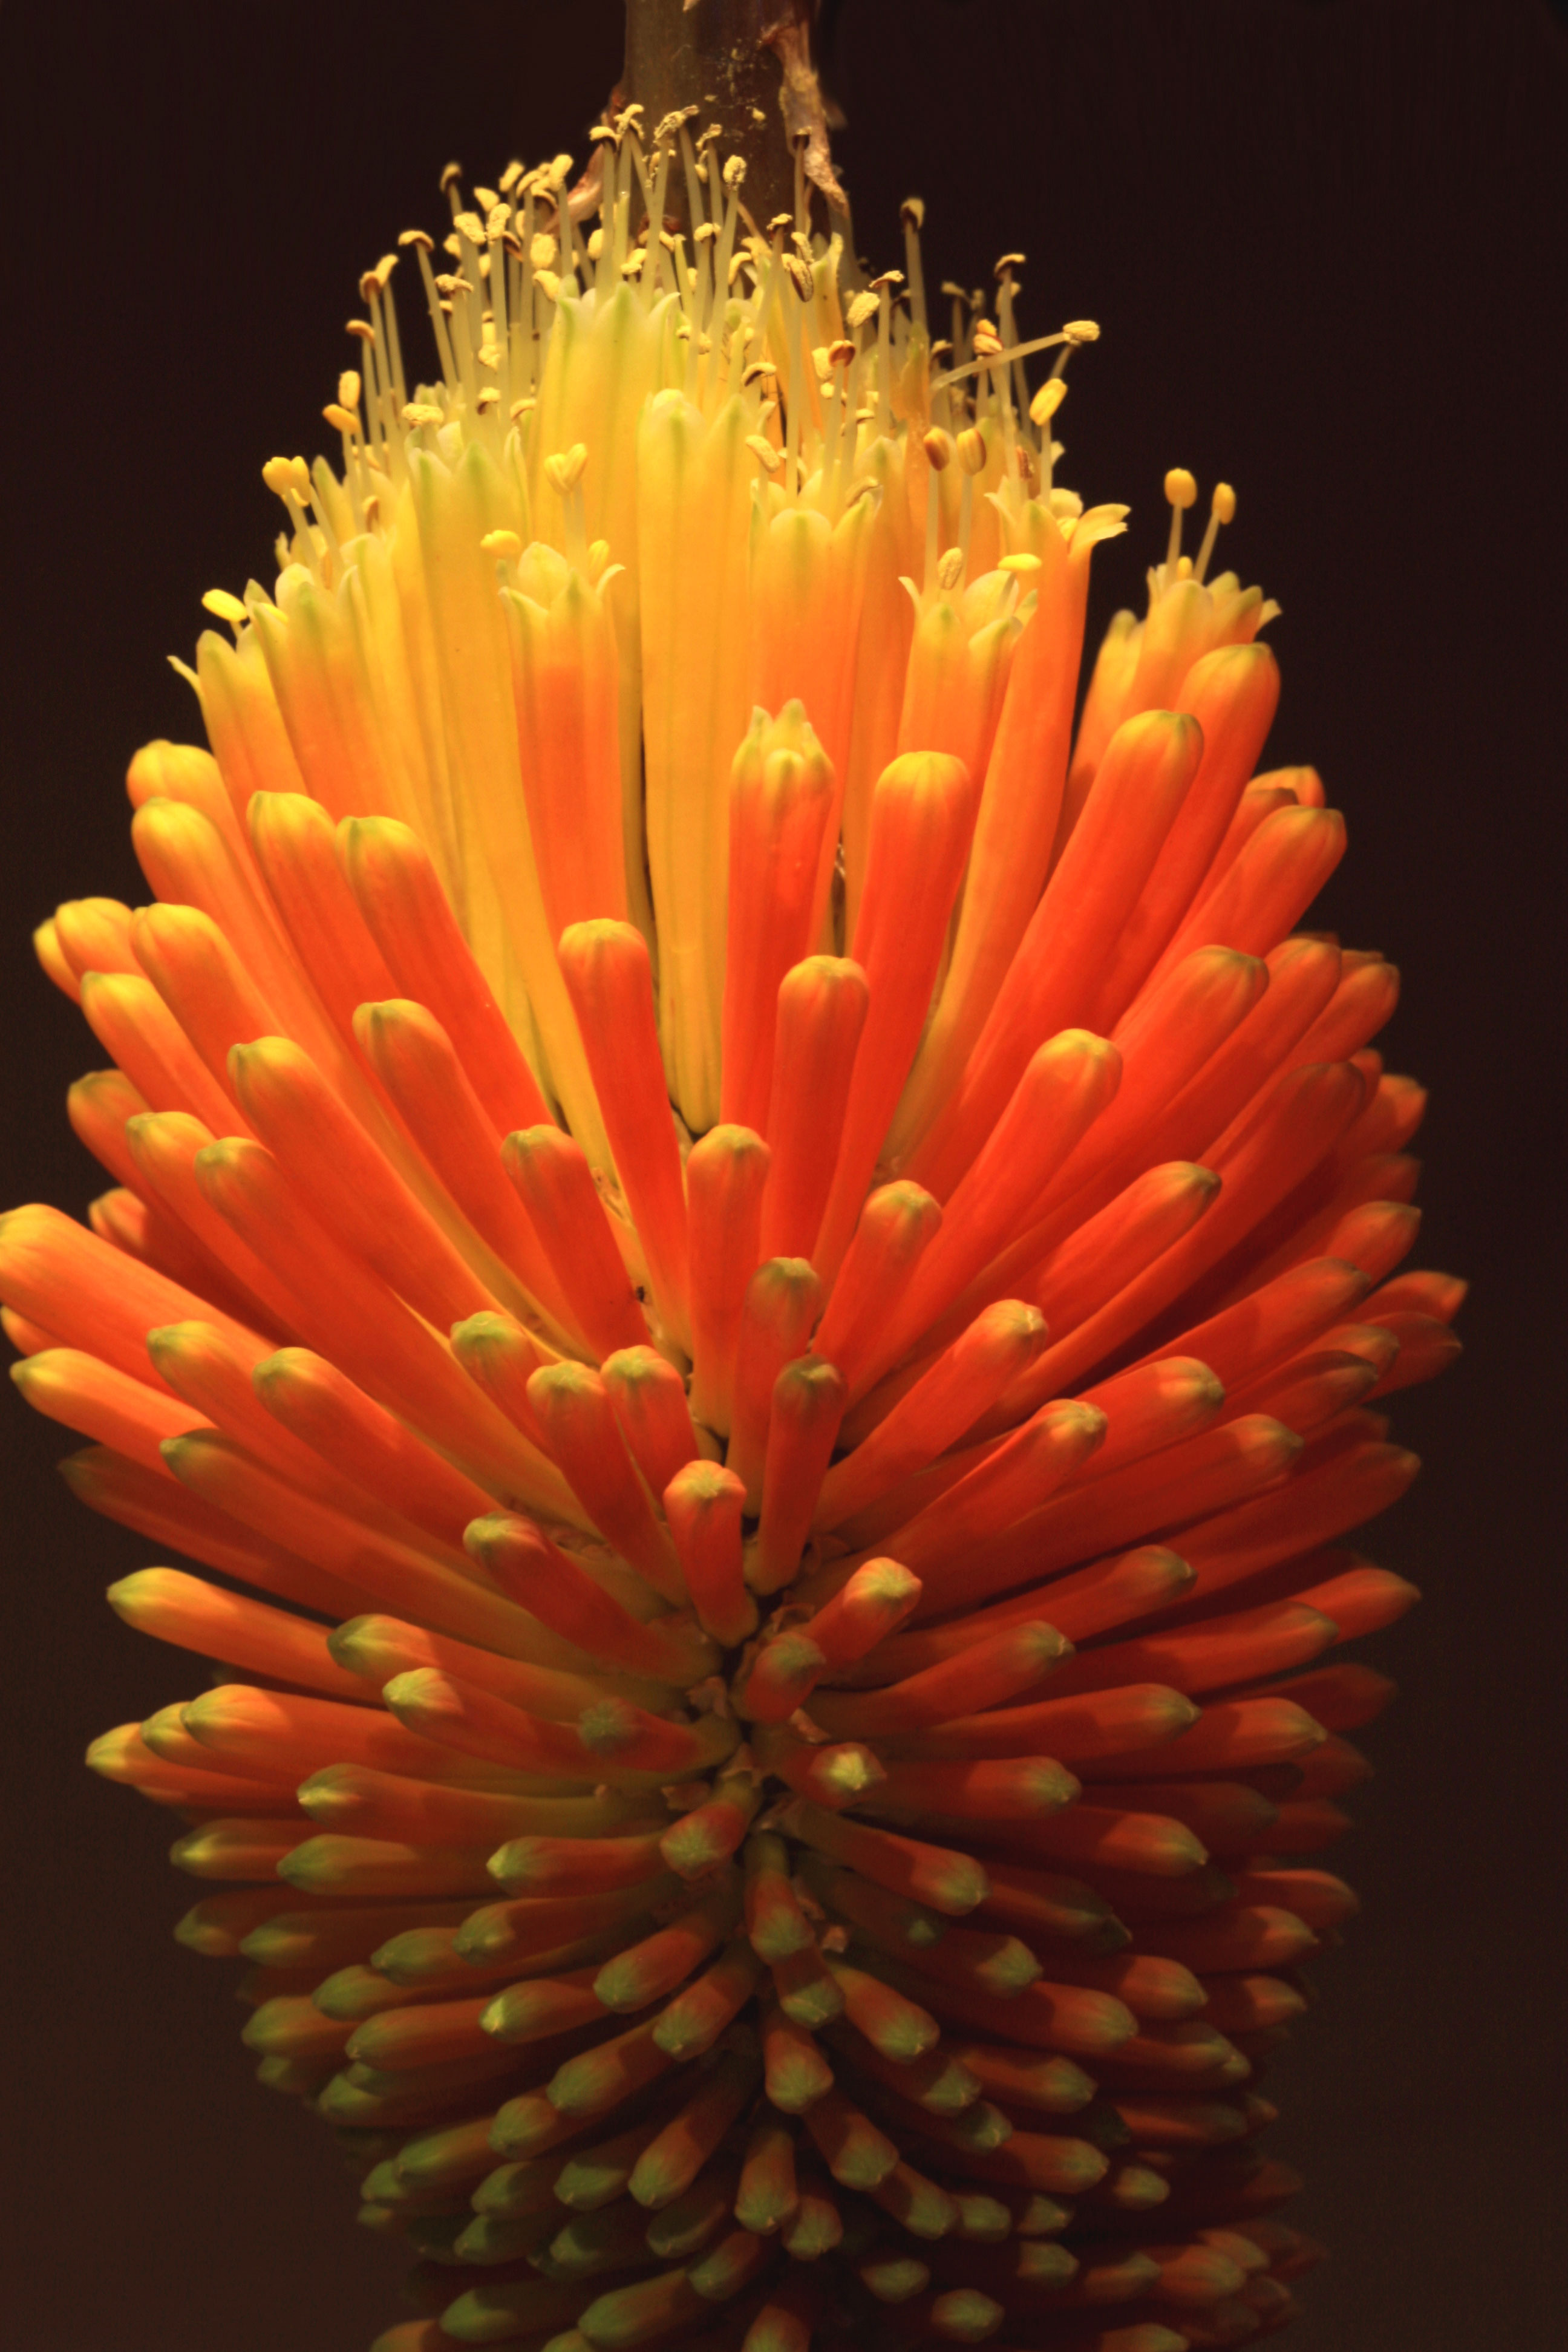 Red Hot Poker image